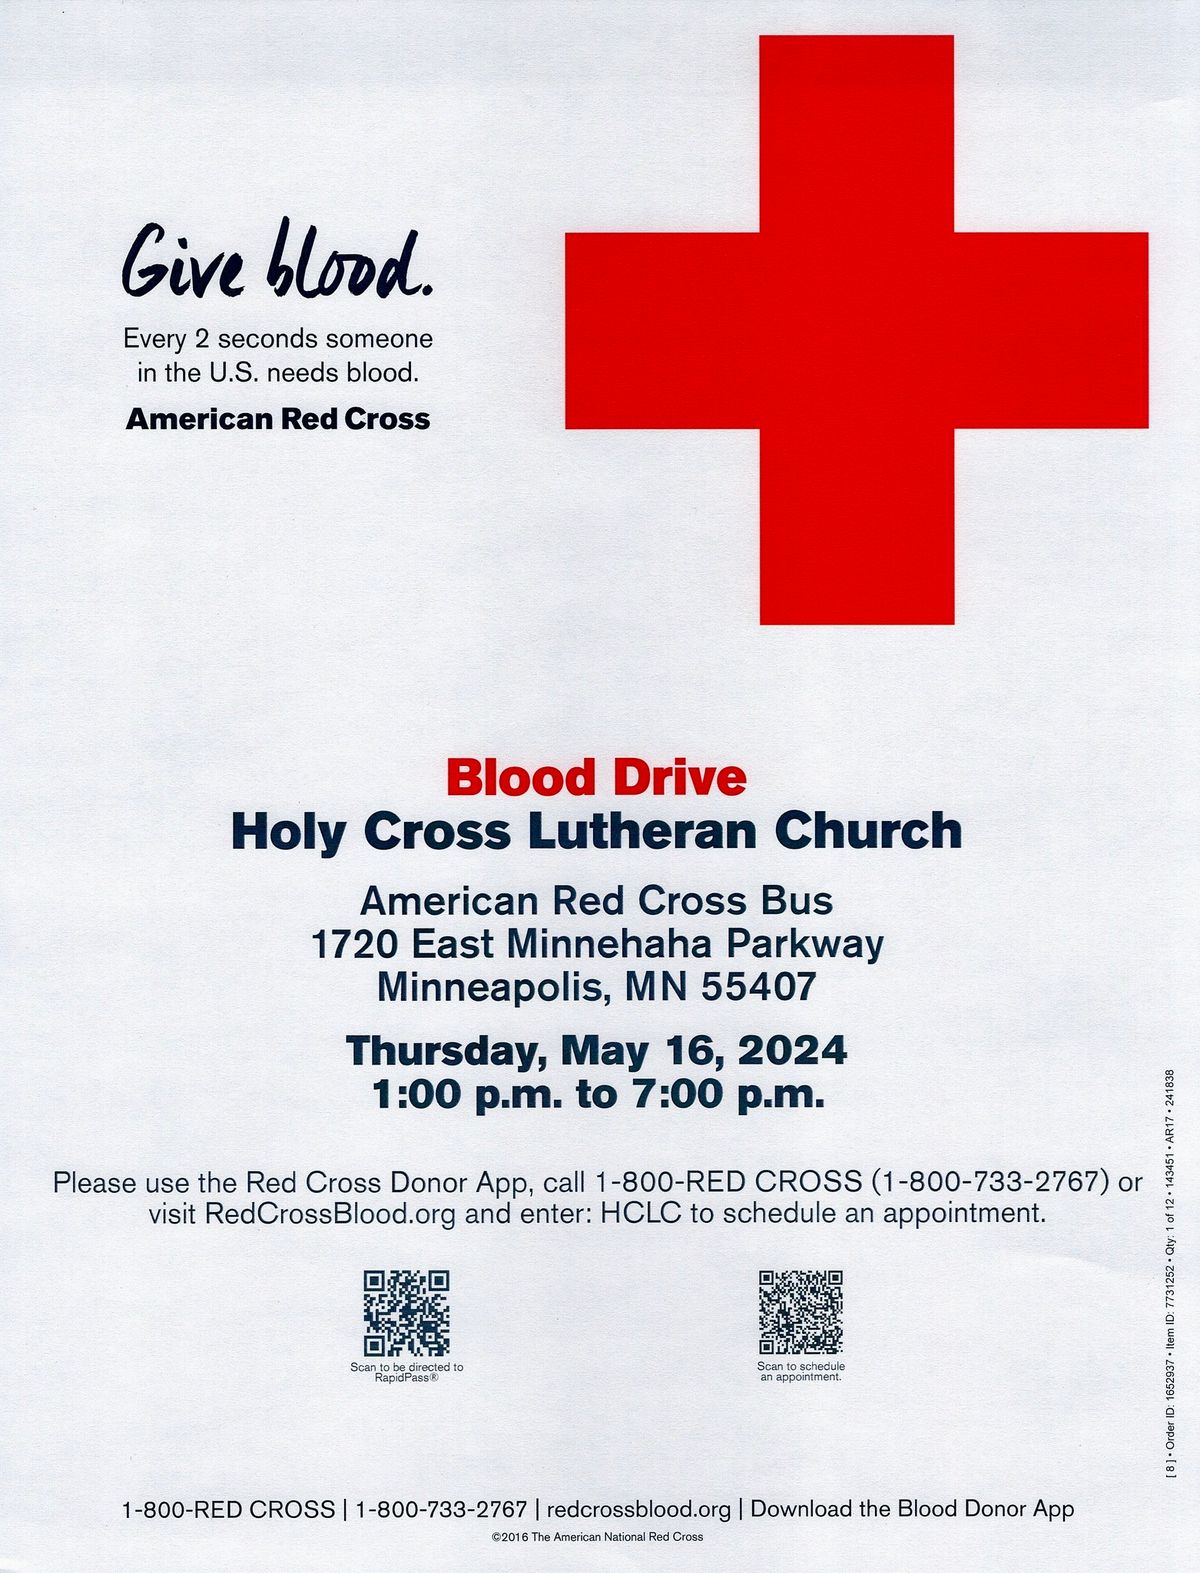 Blood Drive at Holy Cross